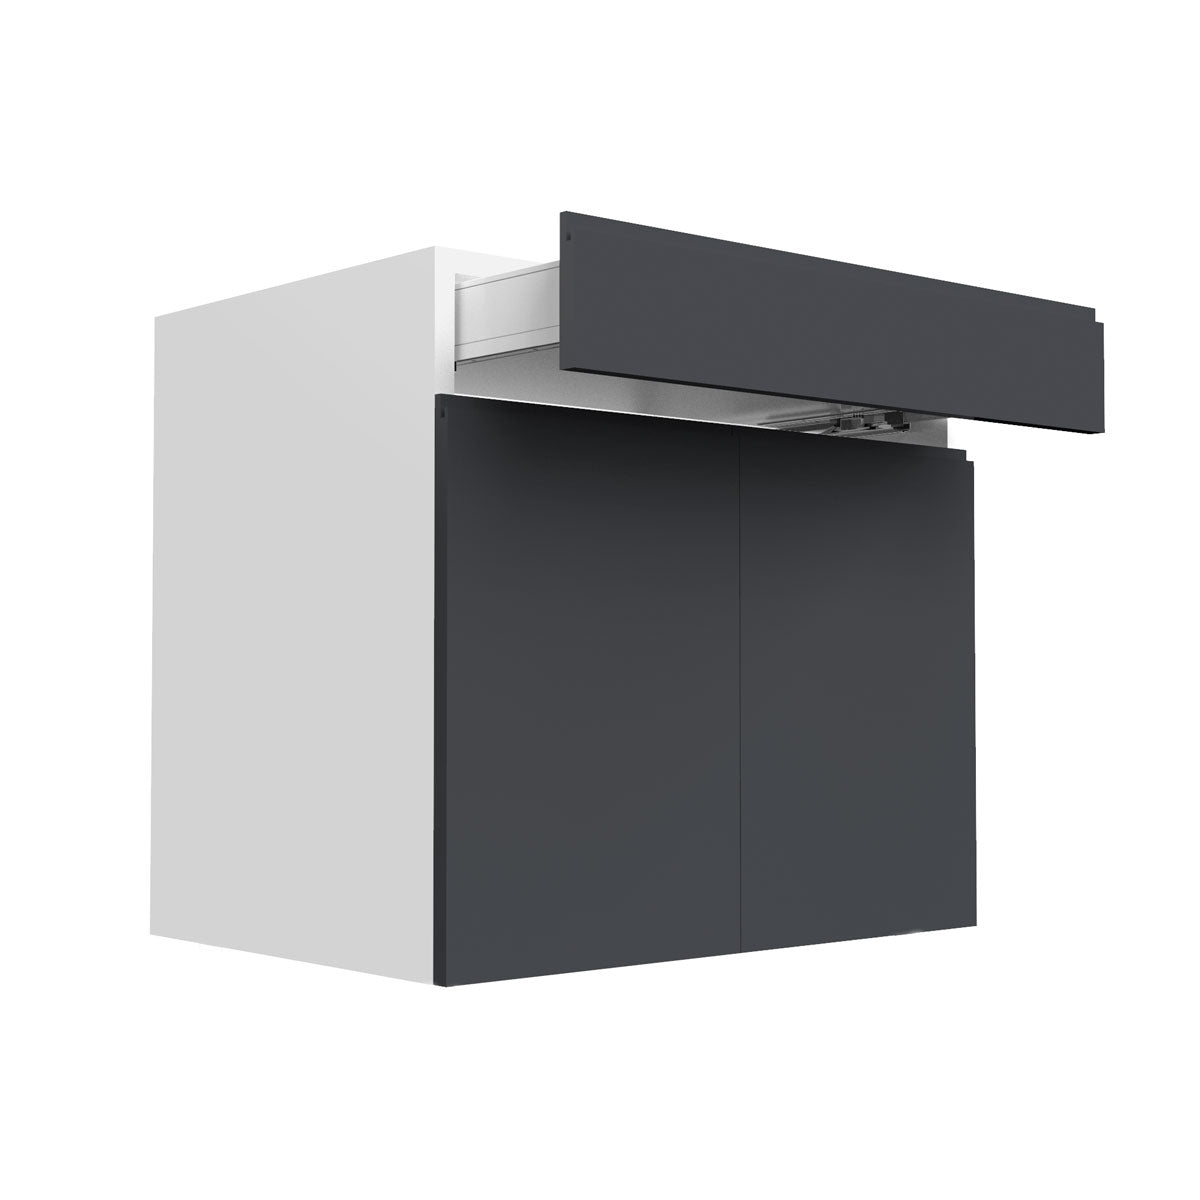 RTA - Lacquer Grey - Double Door Base Cabinets | 33"W x 30"H x 23.8"D